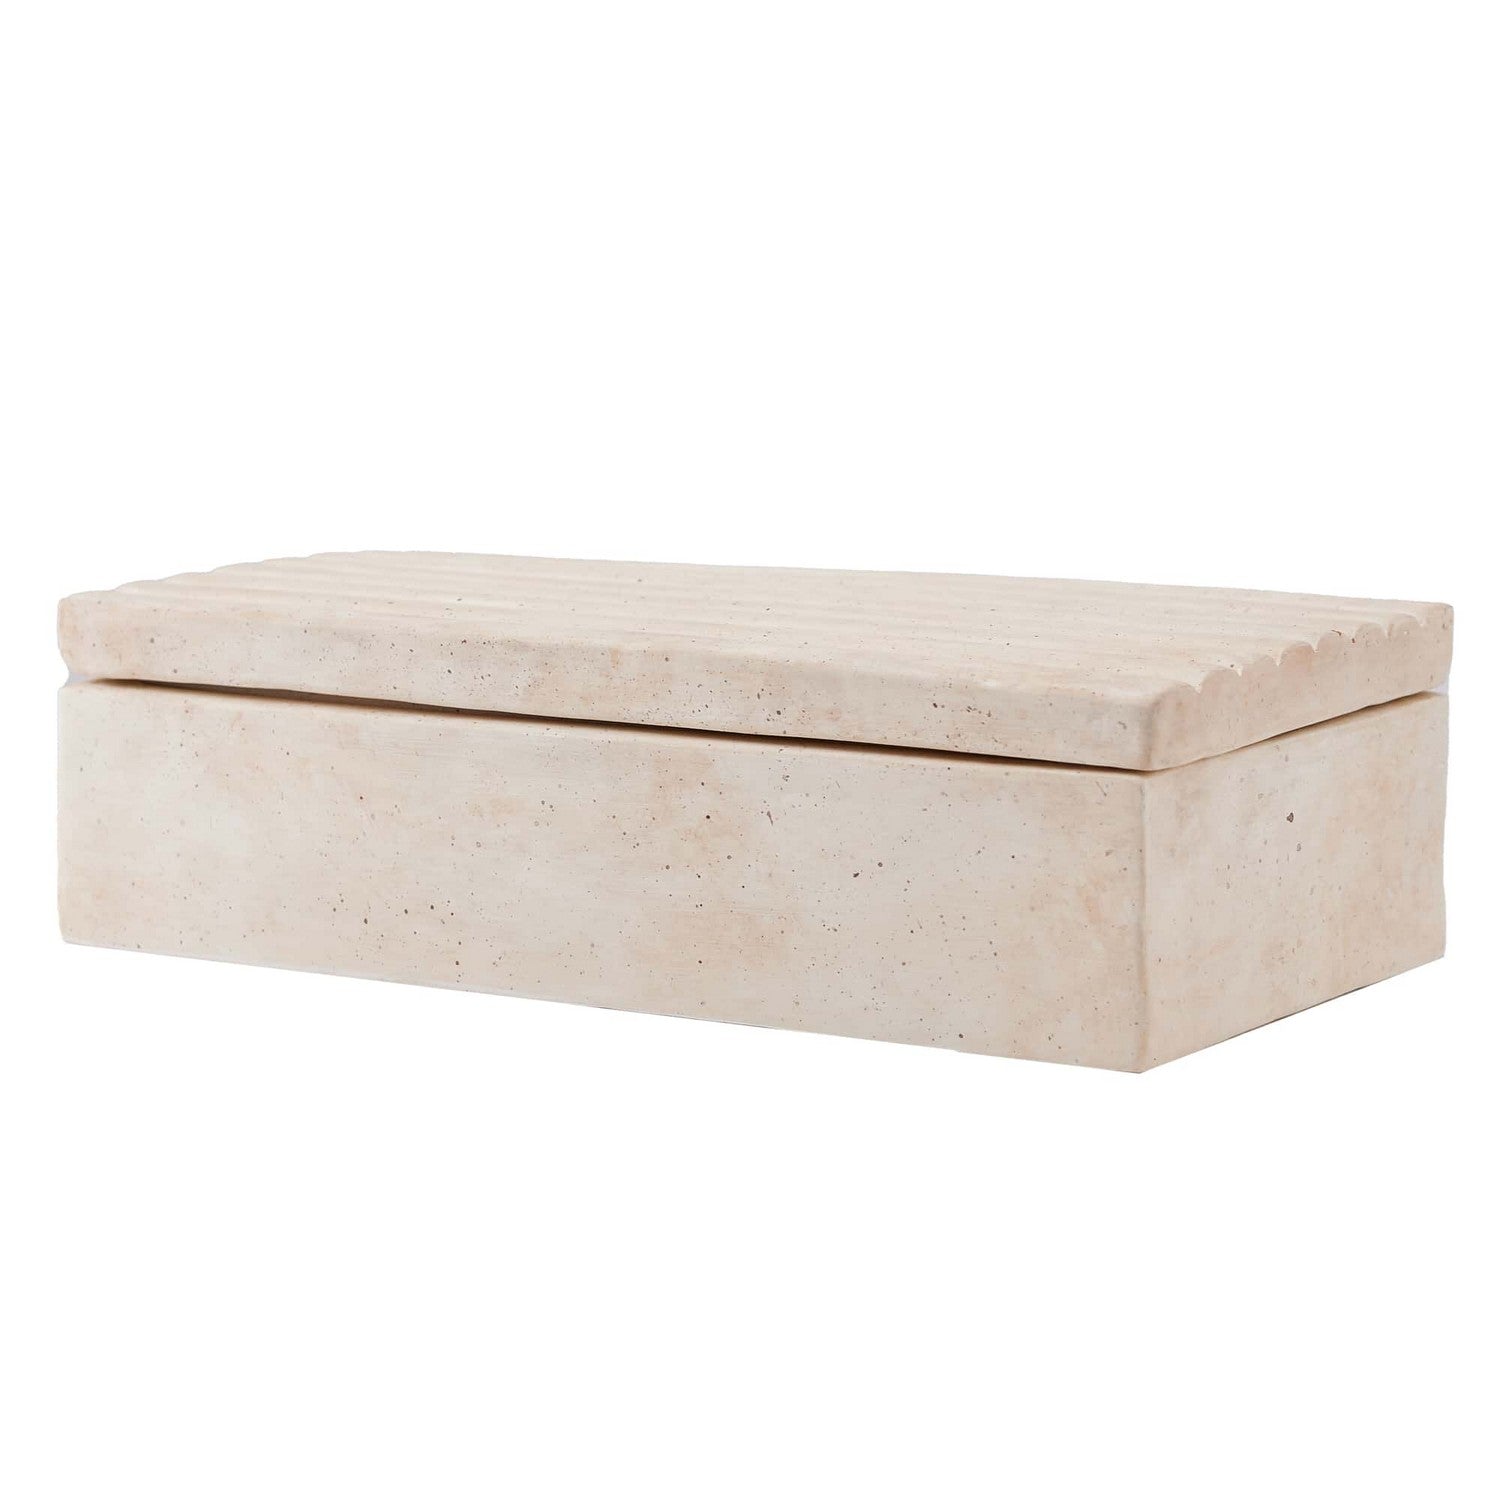 Box from the Terrazas collection in Toasted Ivory finish